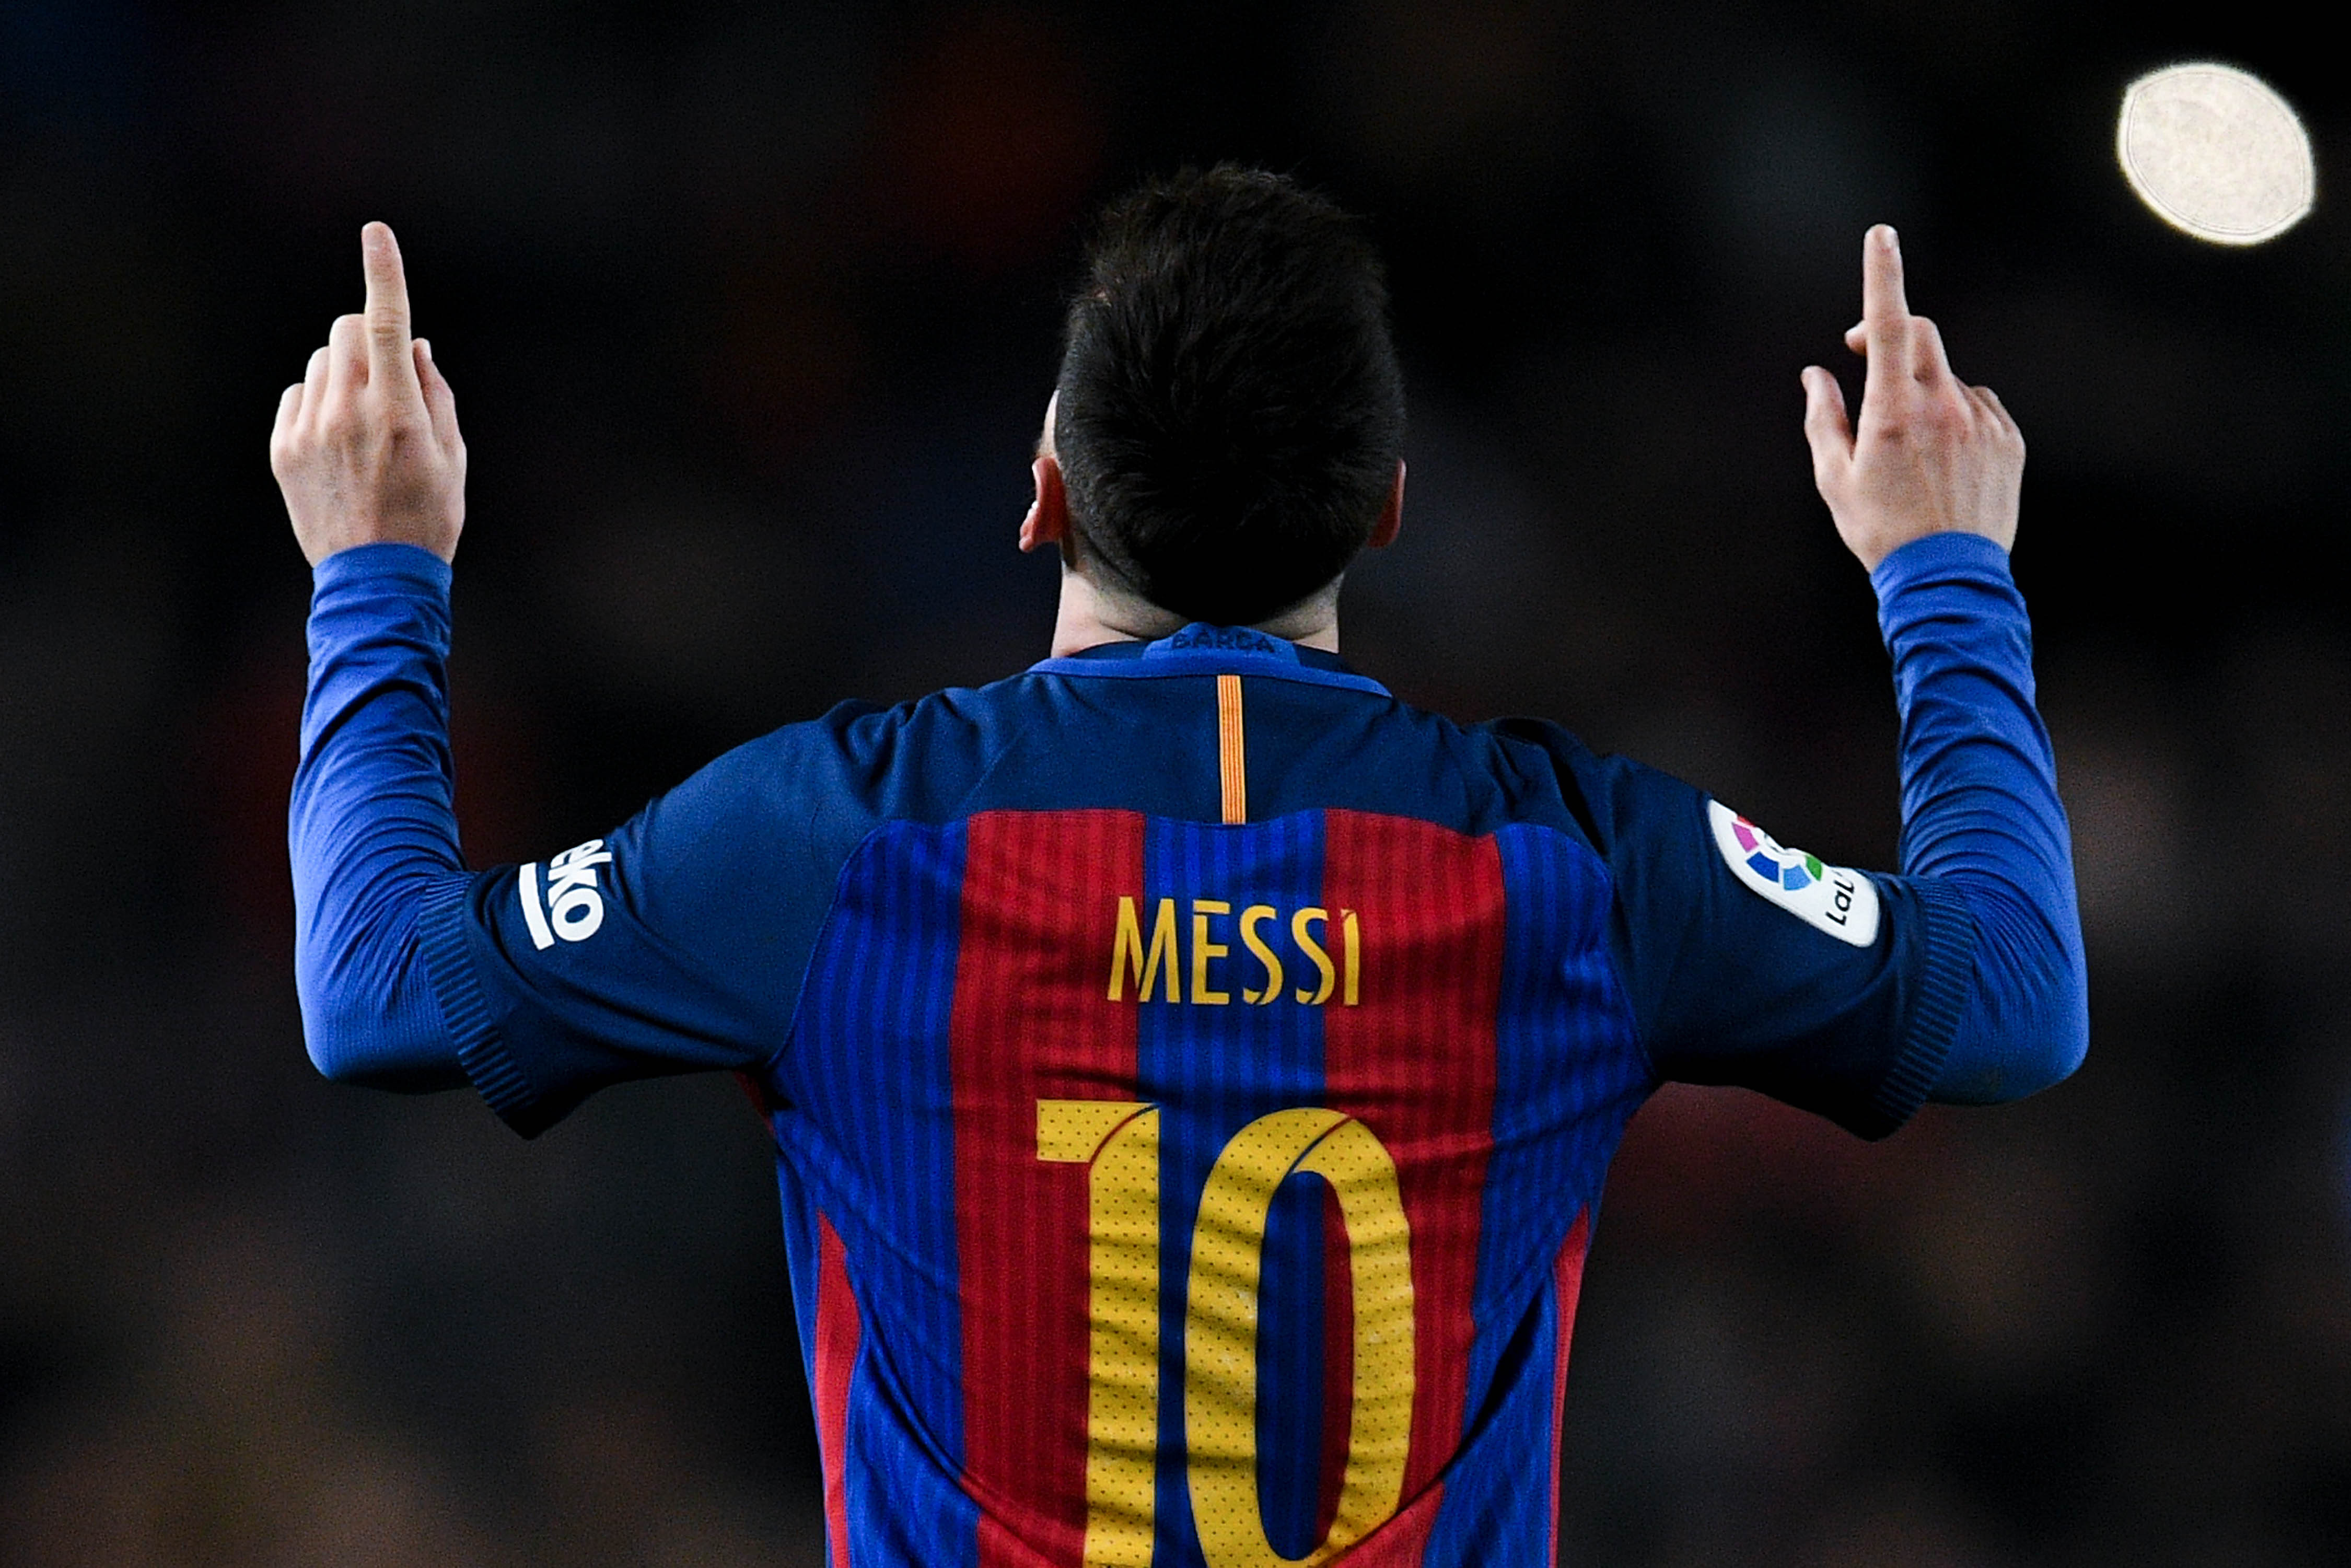 BARCELONA, SPAIN - DECEMBER 18:  Lionel Messi of FC Barcelona celebrates after scoring his team's fourth goal during the La Liga match between FC Barcelona and RCD Espanyol at the Camp Nou stadium on December 18, 2016 in Barcelona, Spain. (Photo by David Ramos/Getty Images)